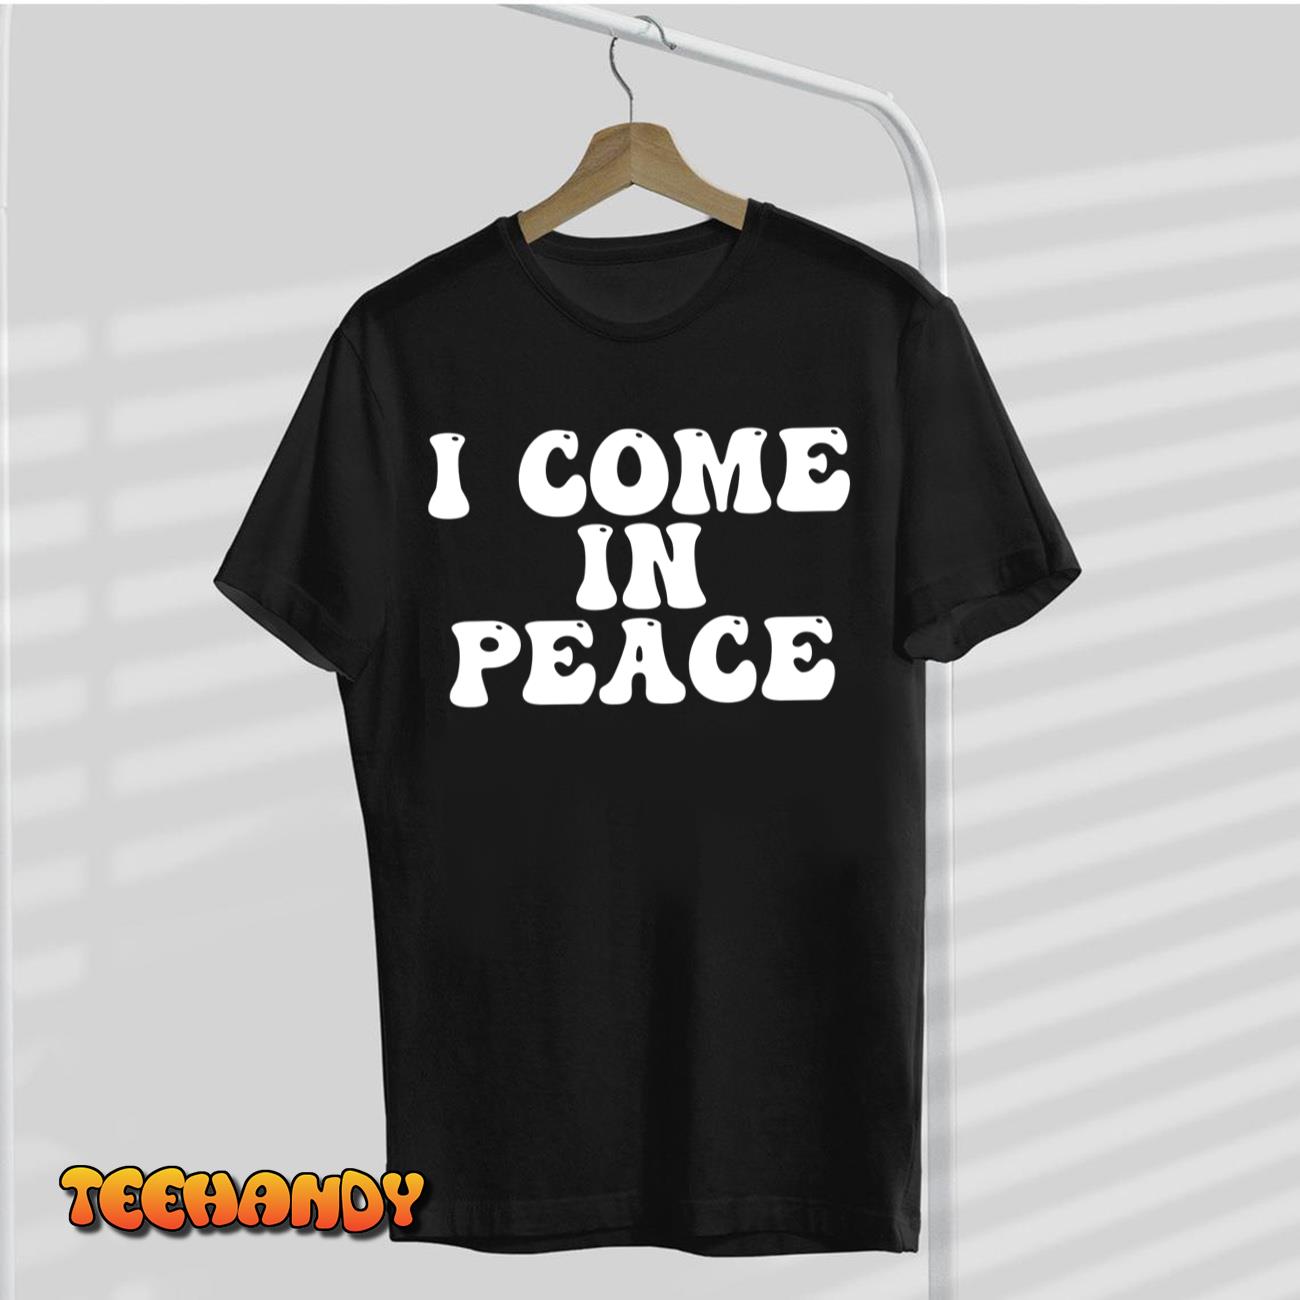 I COME IN PEACE – I’M PEACE Funny Couple’s Matching T-Shirt